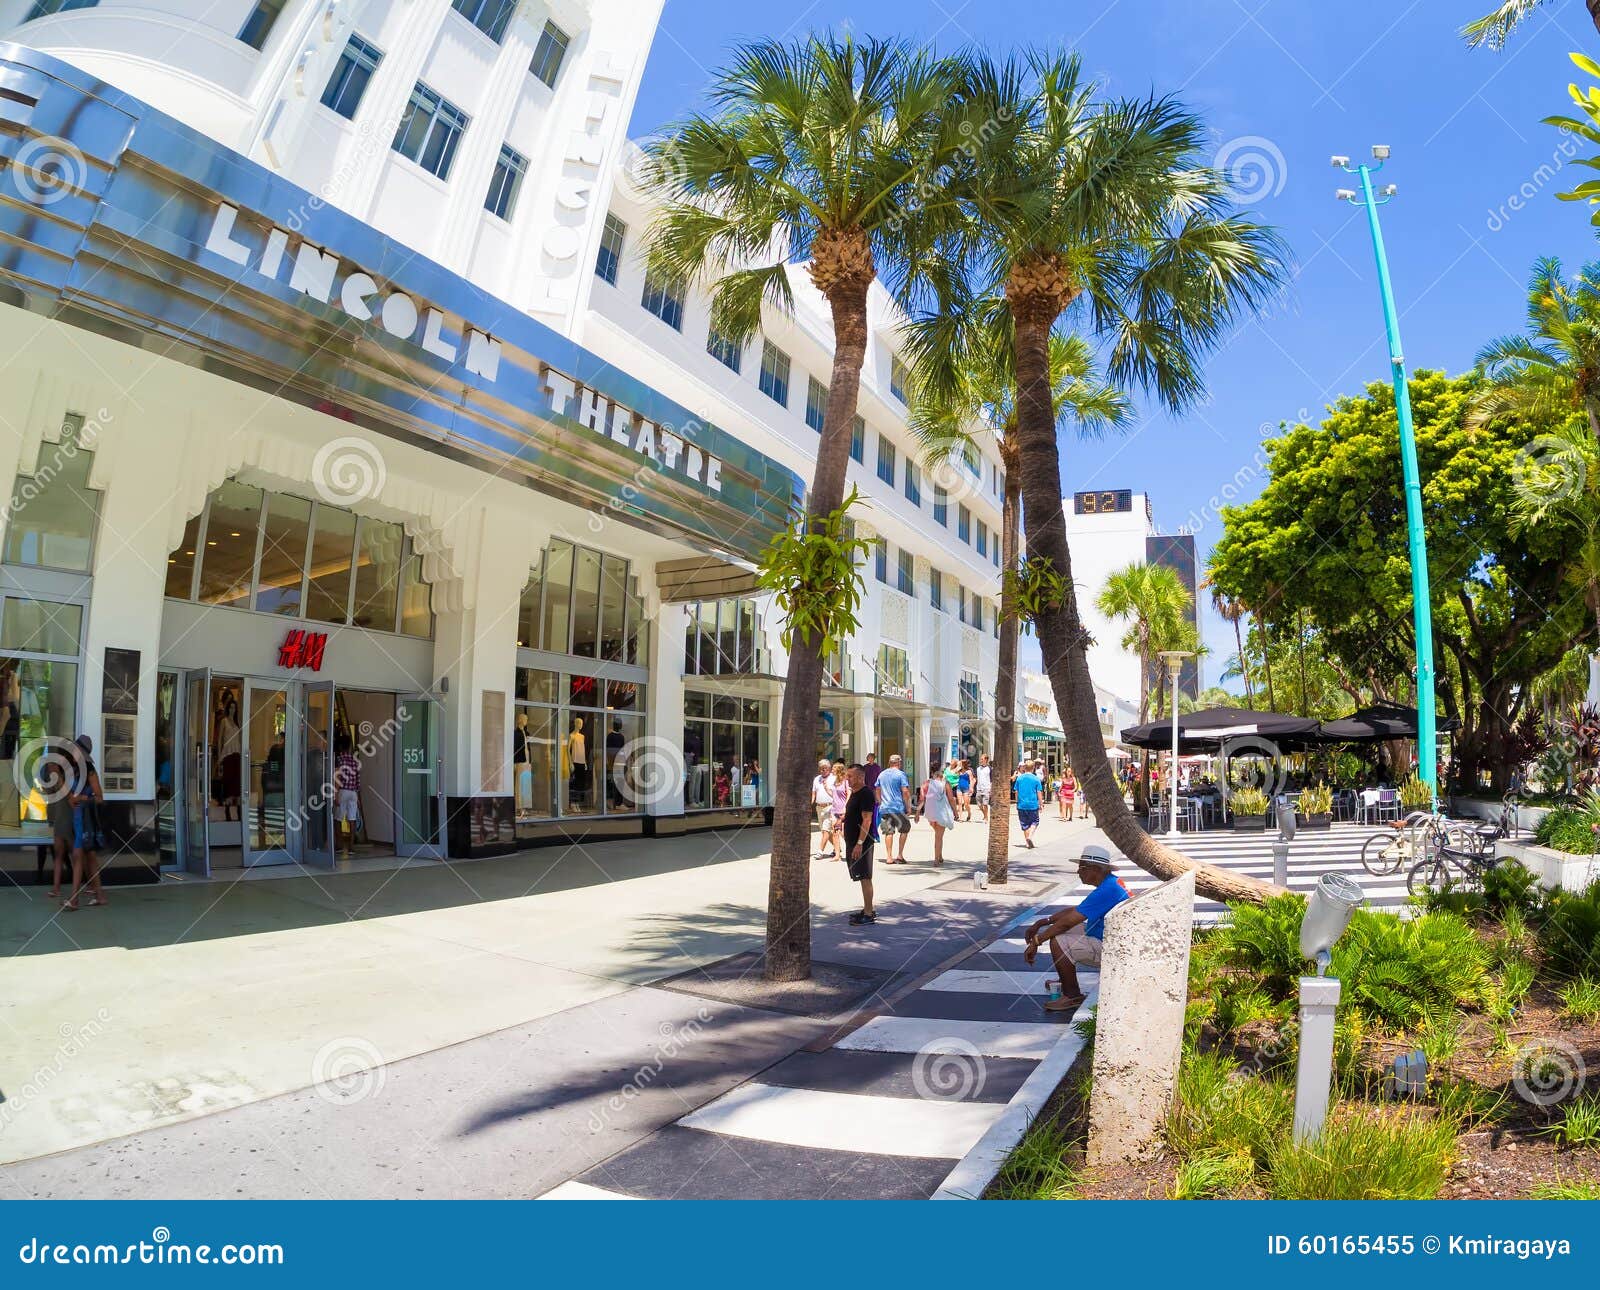 Tour Miami's Famed Shopping Streets